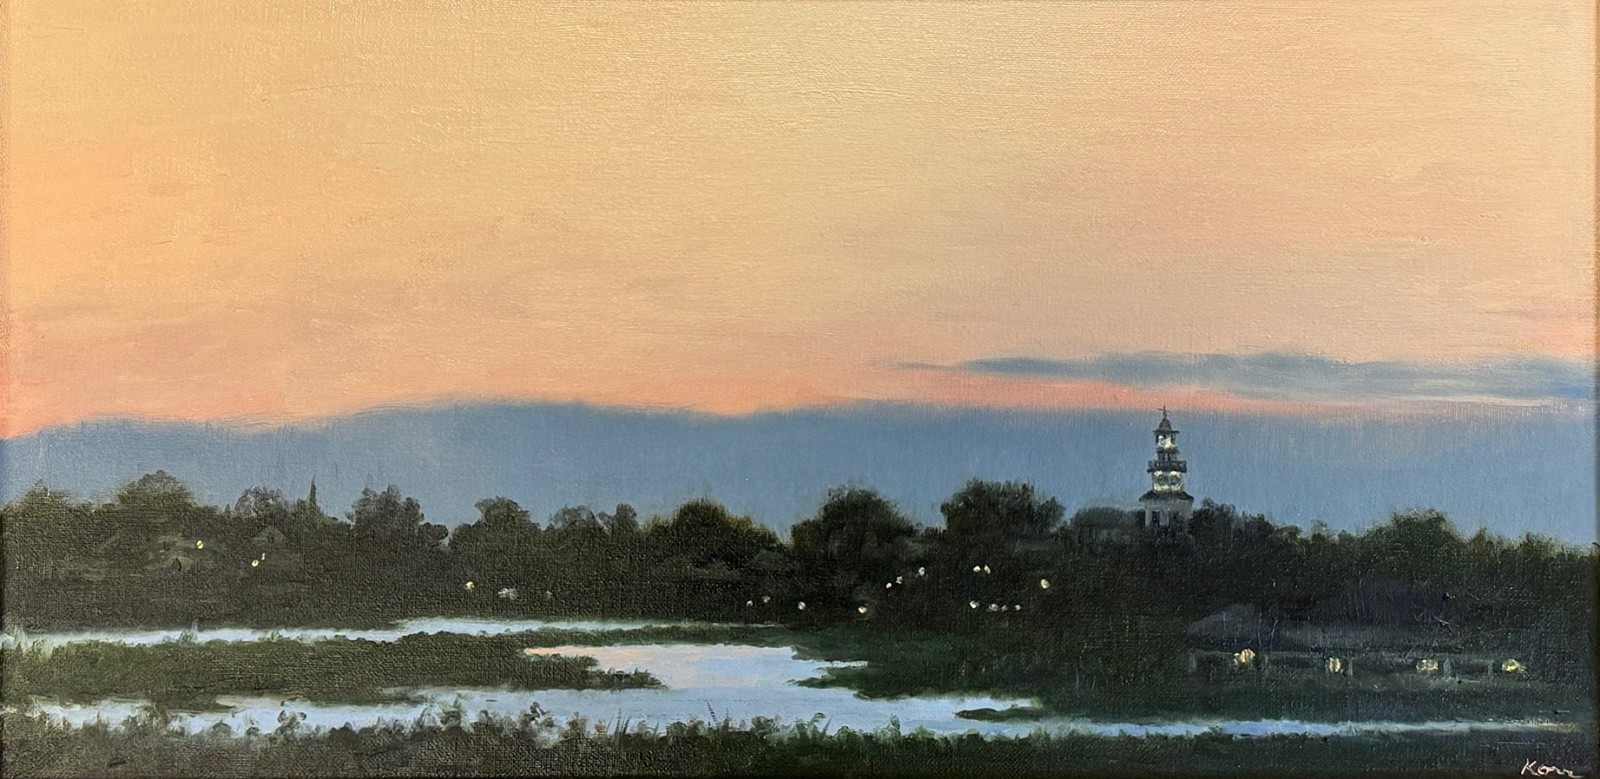 Marla Korr, Dusk, View of Town from the Creeks
oil on linen, 12 x 24 in. (30.5 x 61 cm)
MK240408